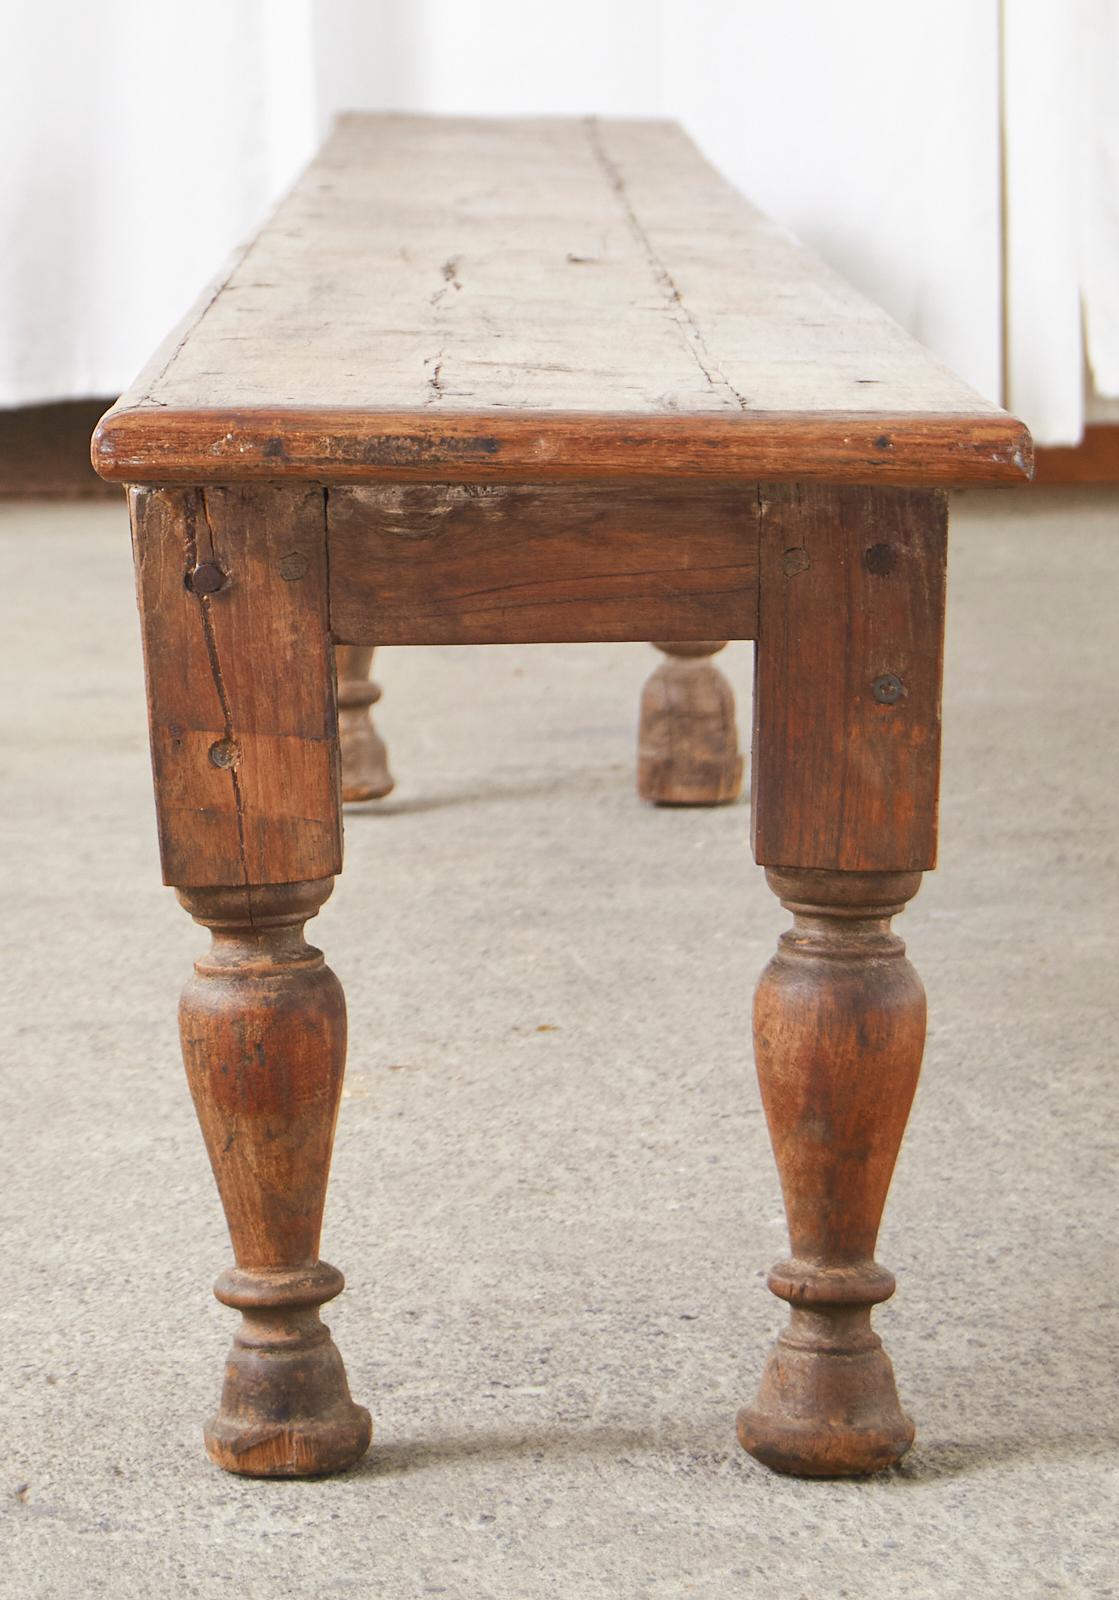 19th Century British Colonial Hardwood Low Table or Bench 4